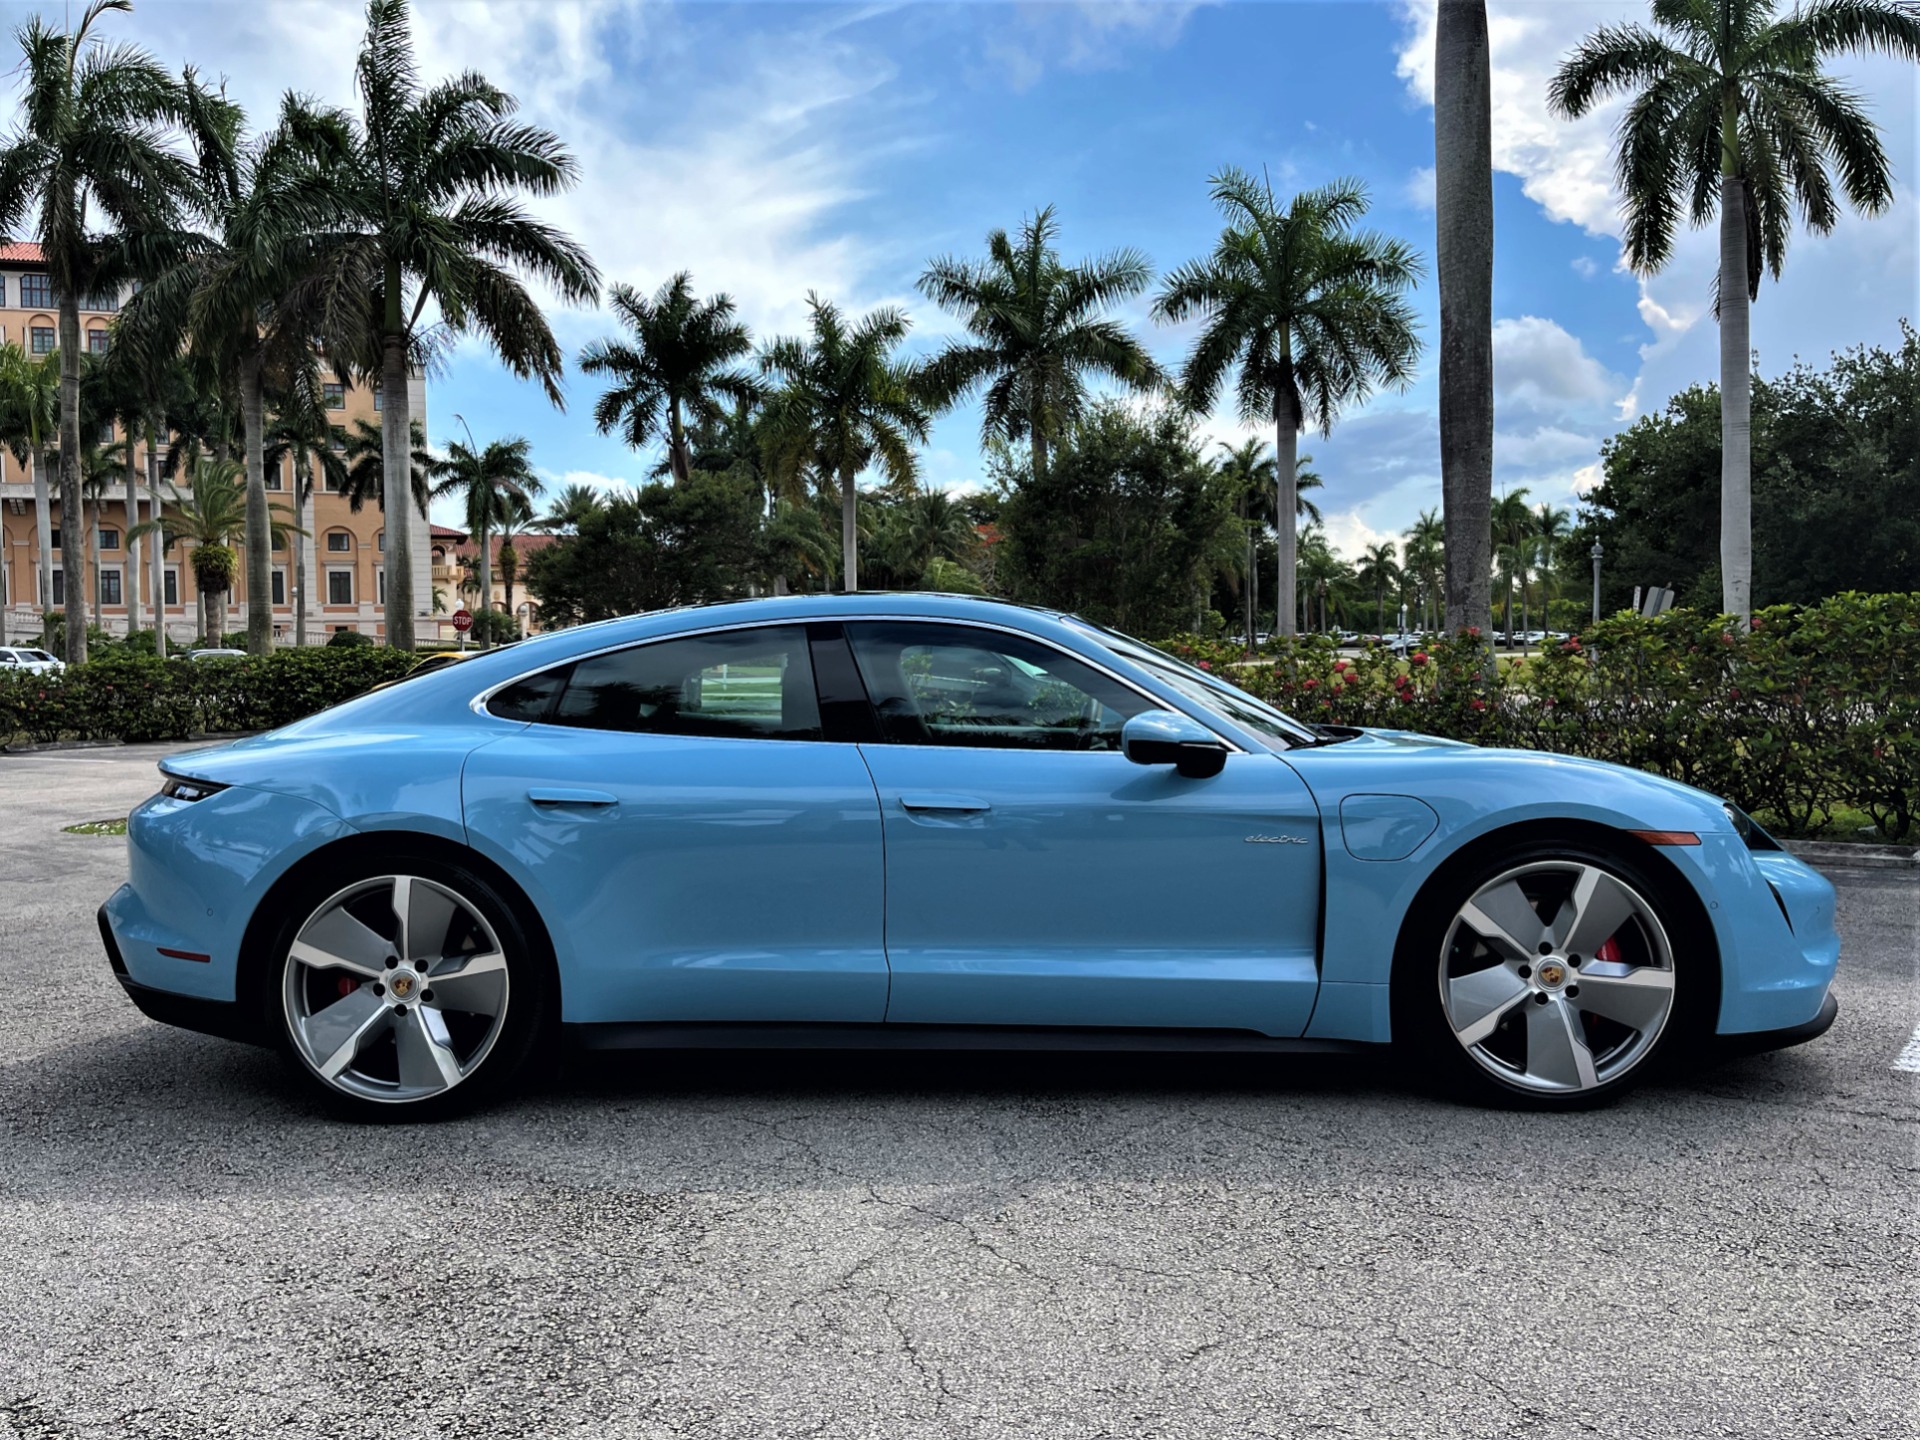 Used 2020 Porsche Taycan 4S for sale $139,850 at The Gables Sports Cars in Miami FL 33146 4